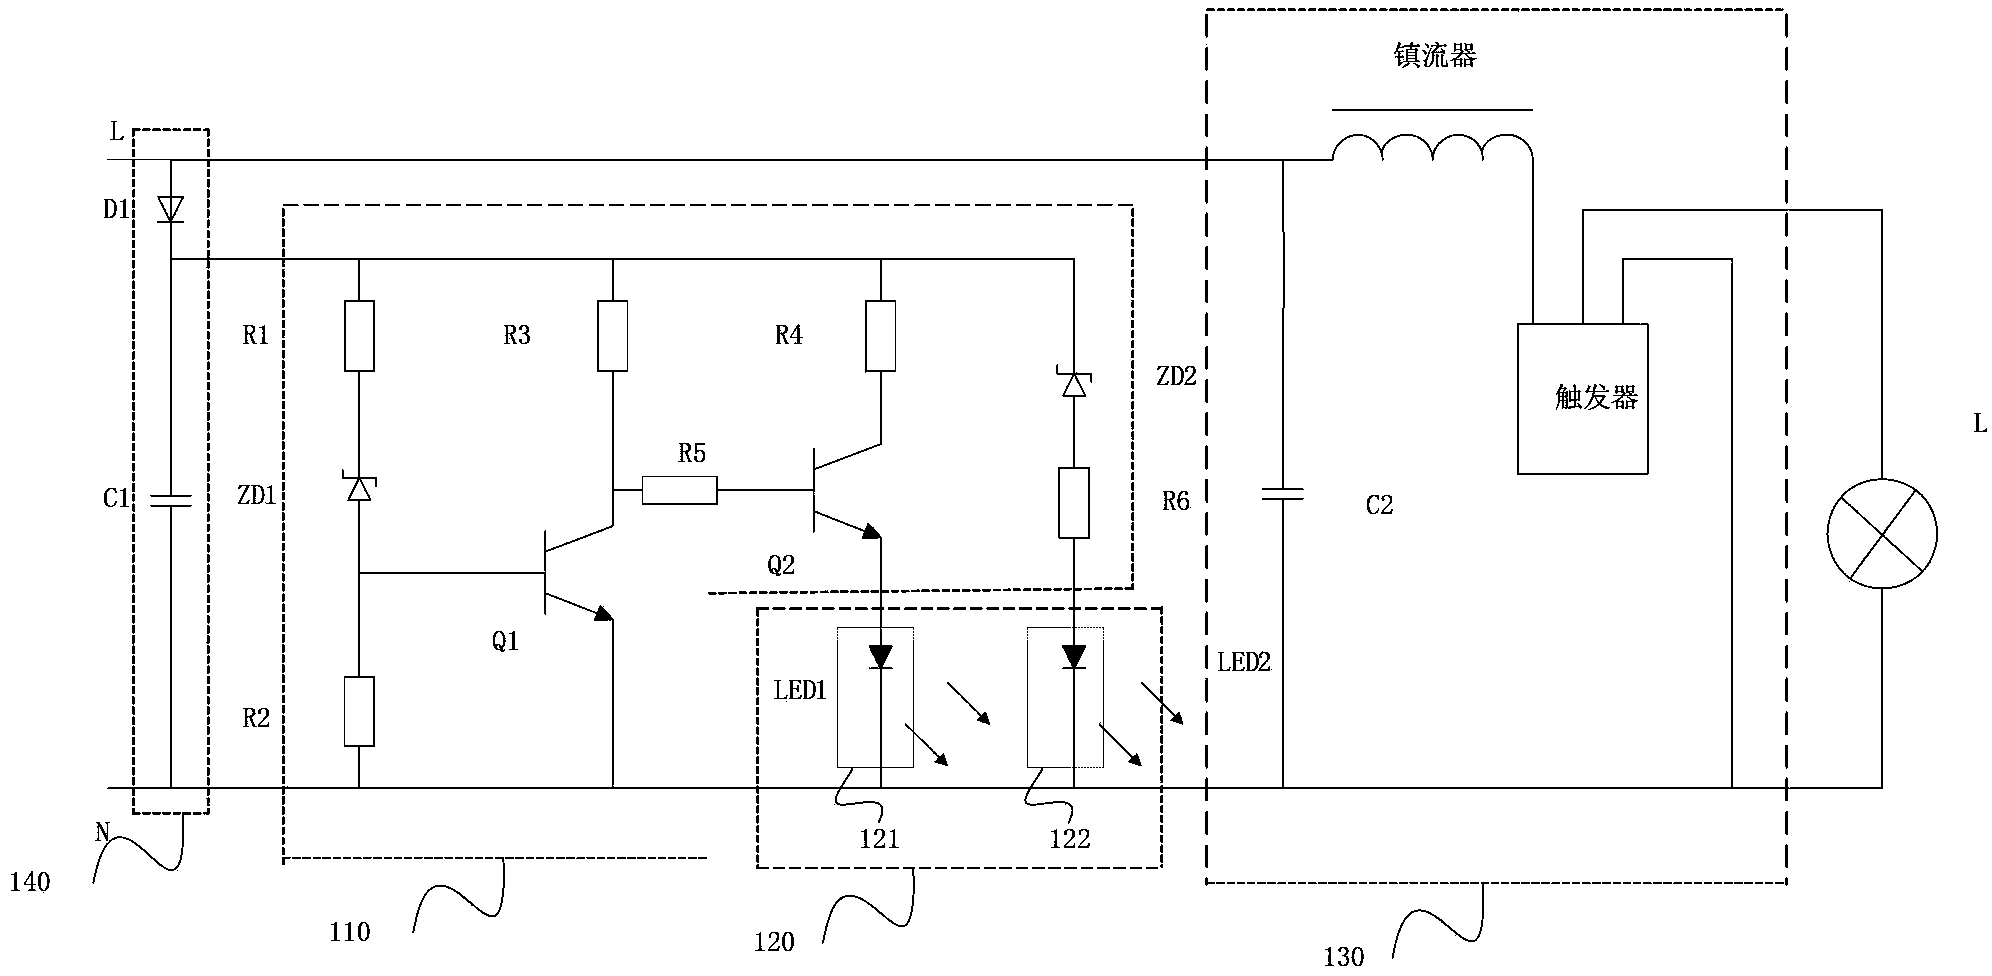 Voltage indicating circuit and lamp